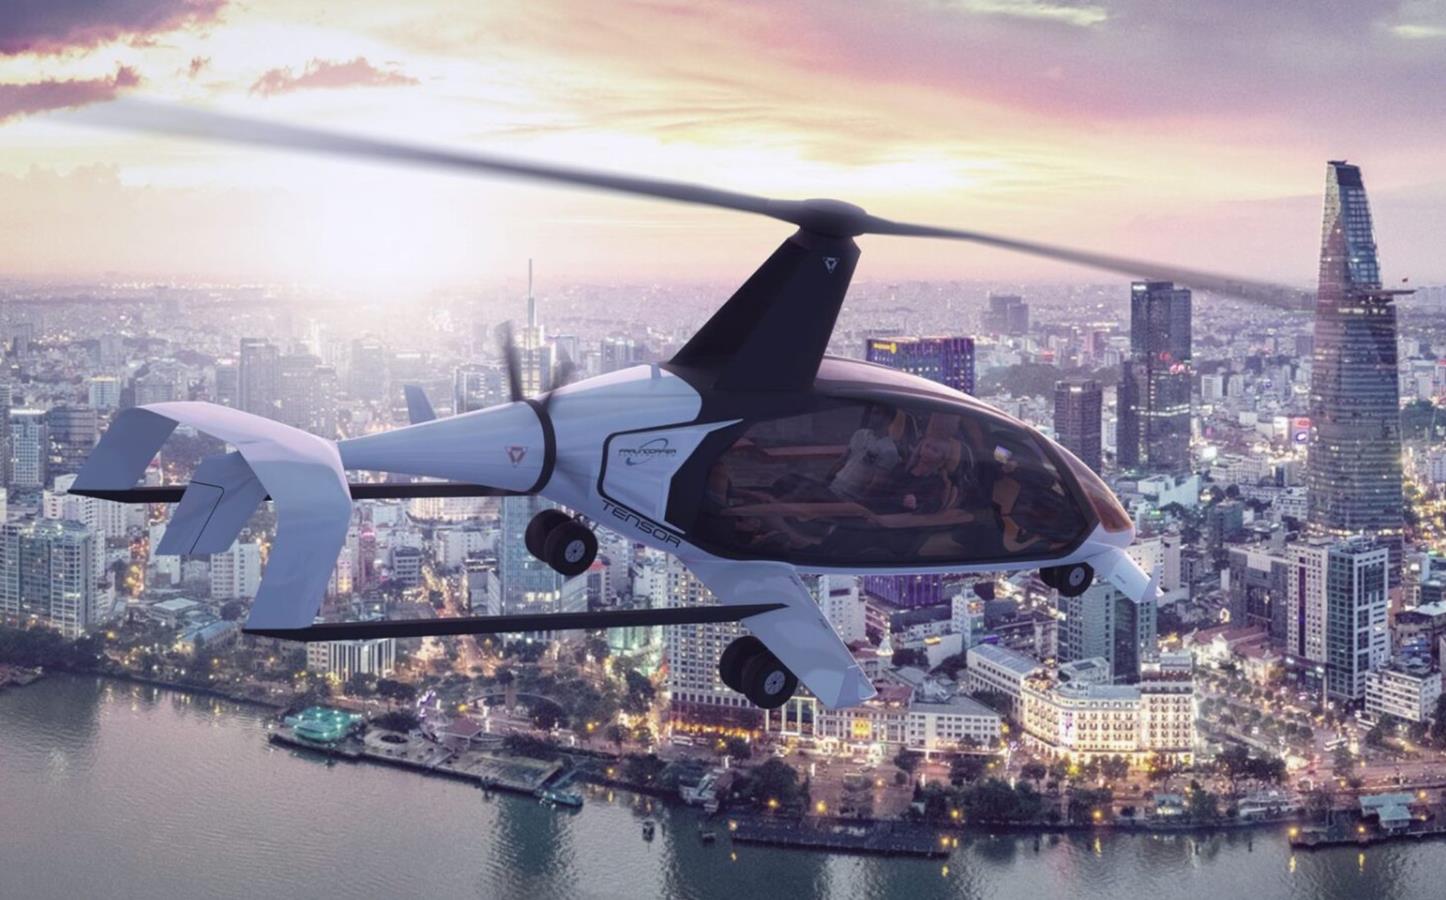 The Tensor 600X gyroplane shows what "inferior VTOL" is